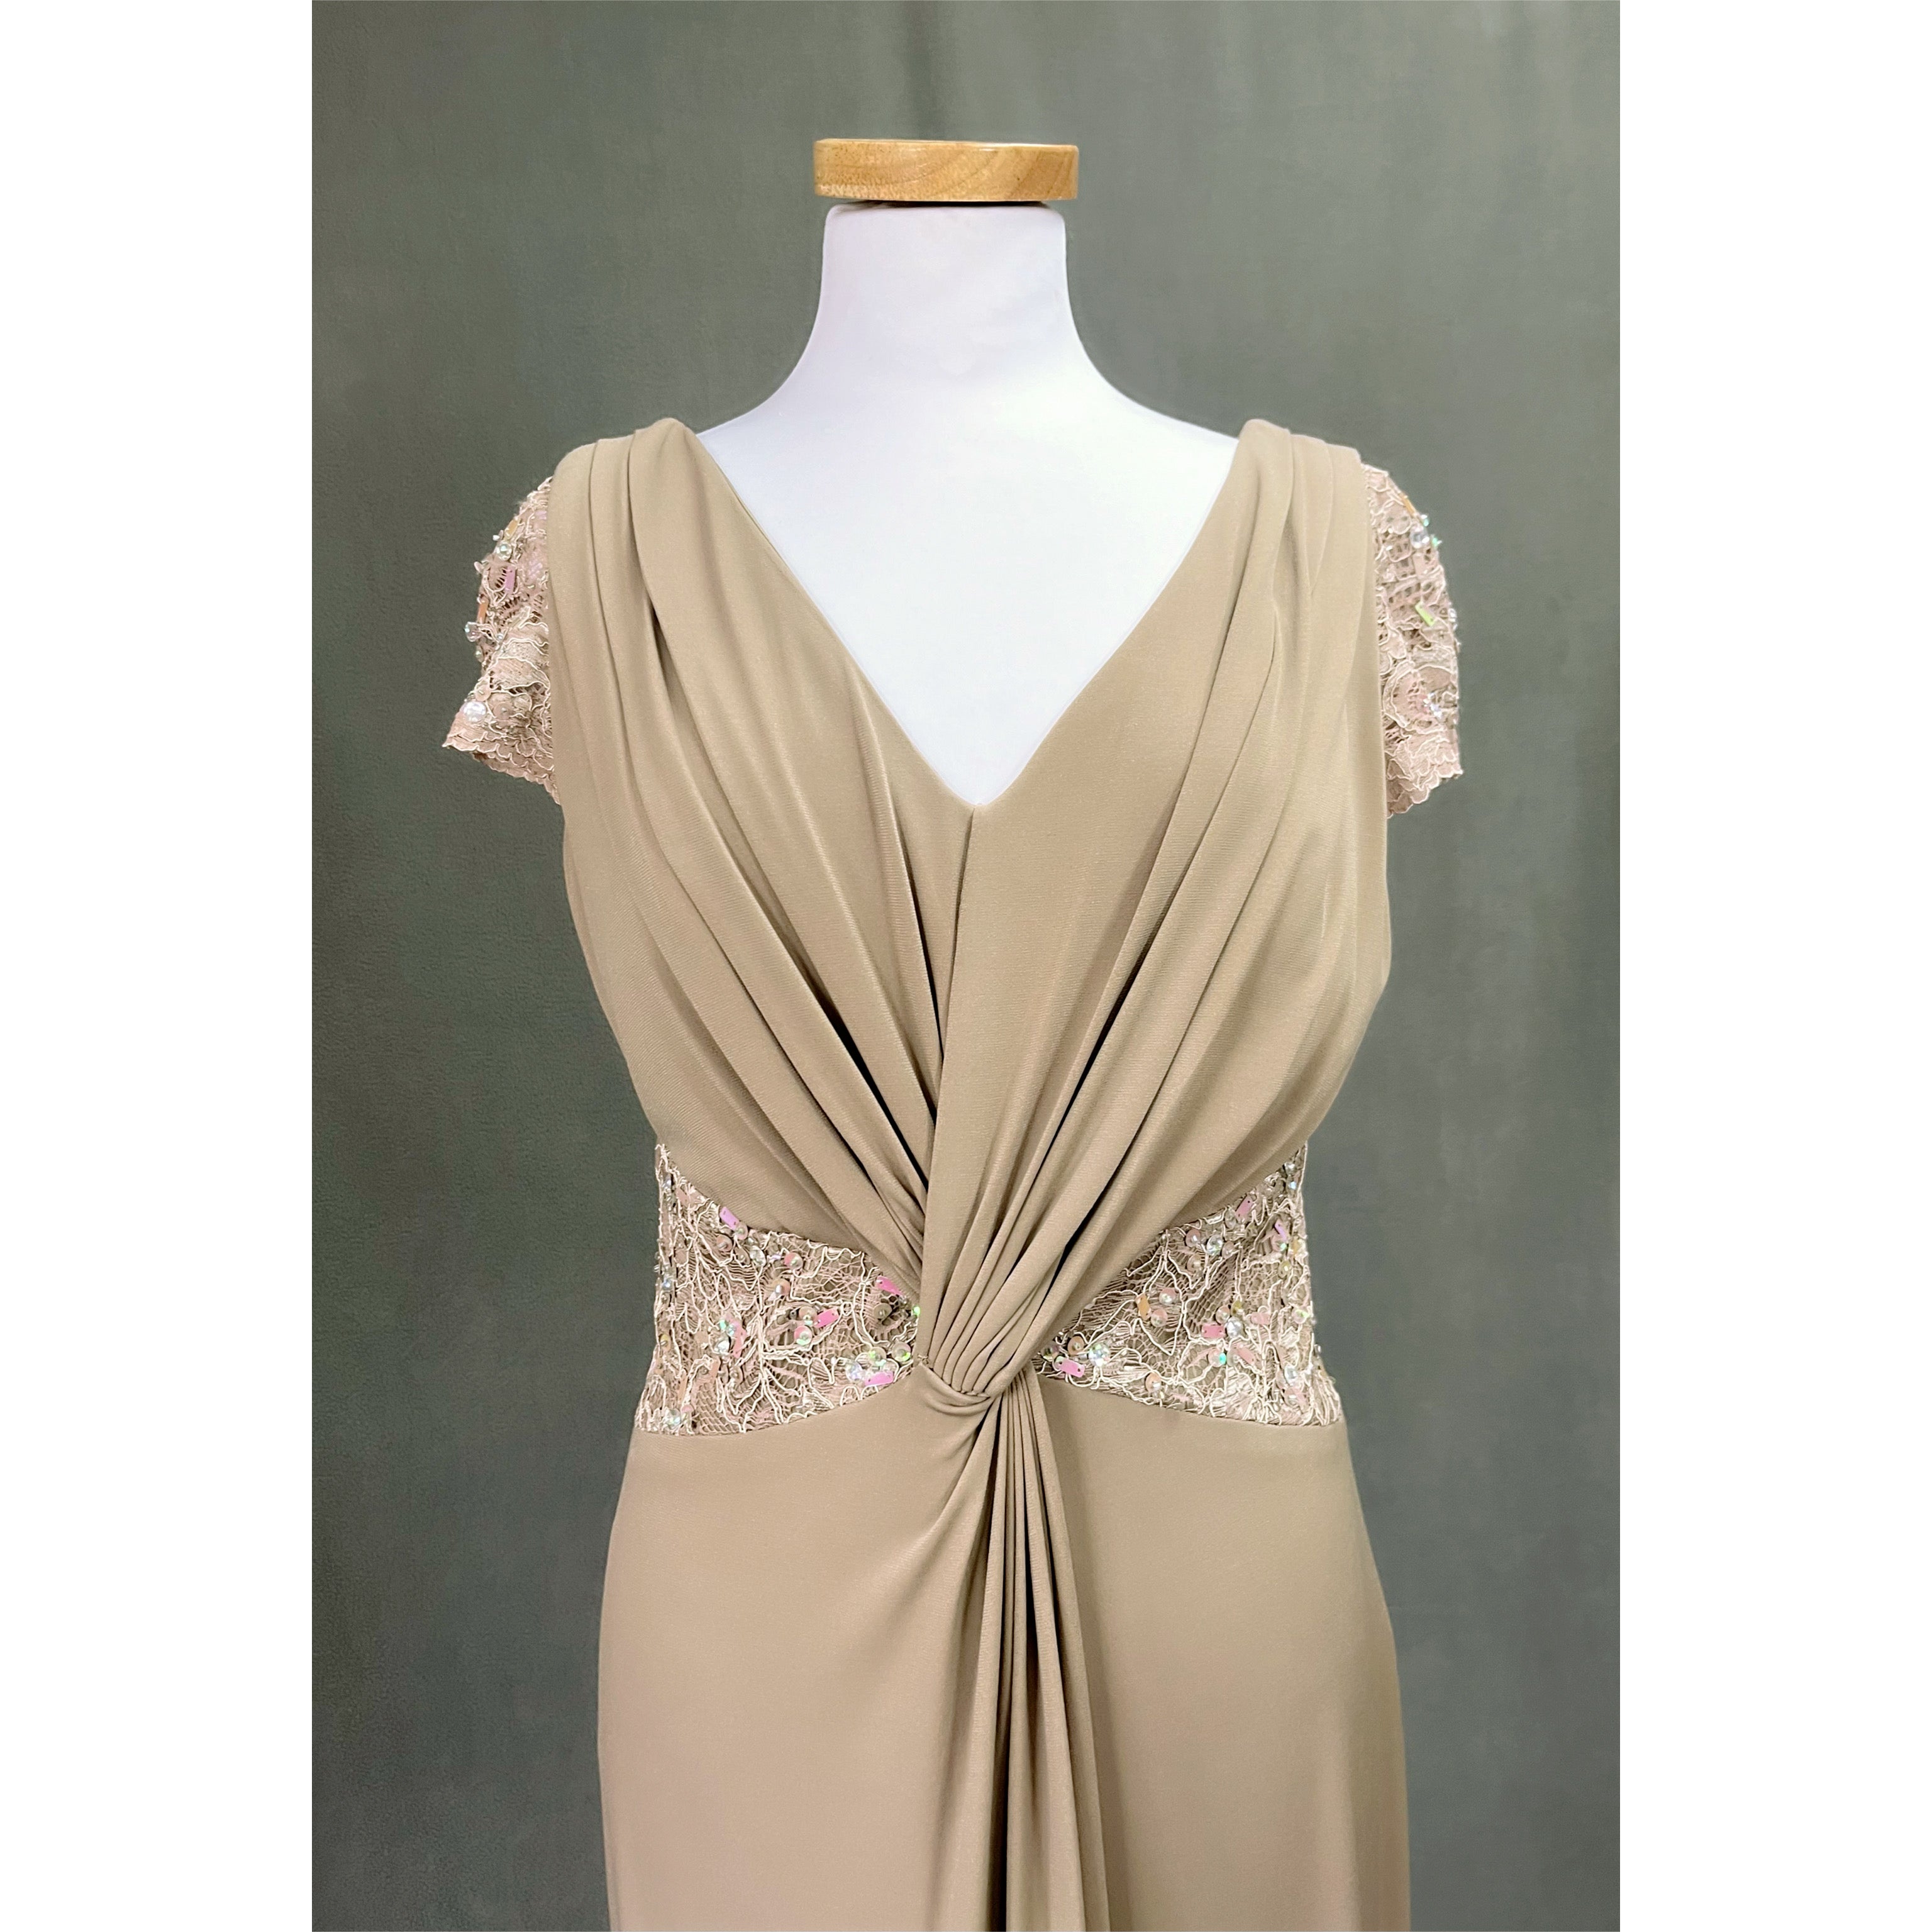 KM Collections champagne dress, size 8, NEW WITH TAGS!